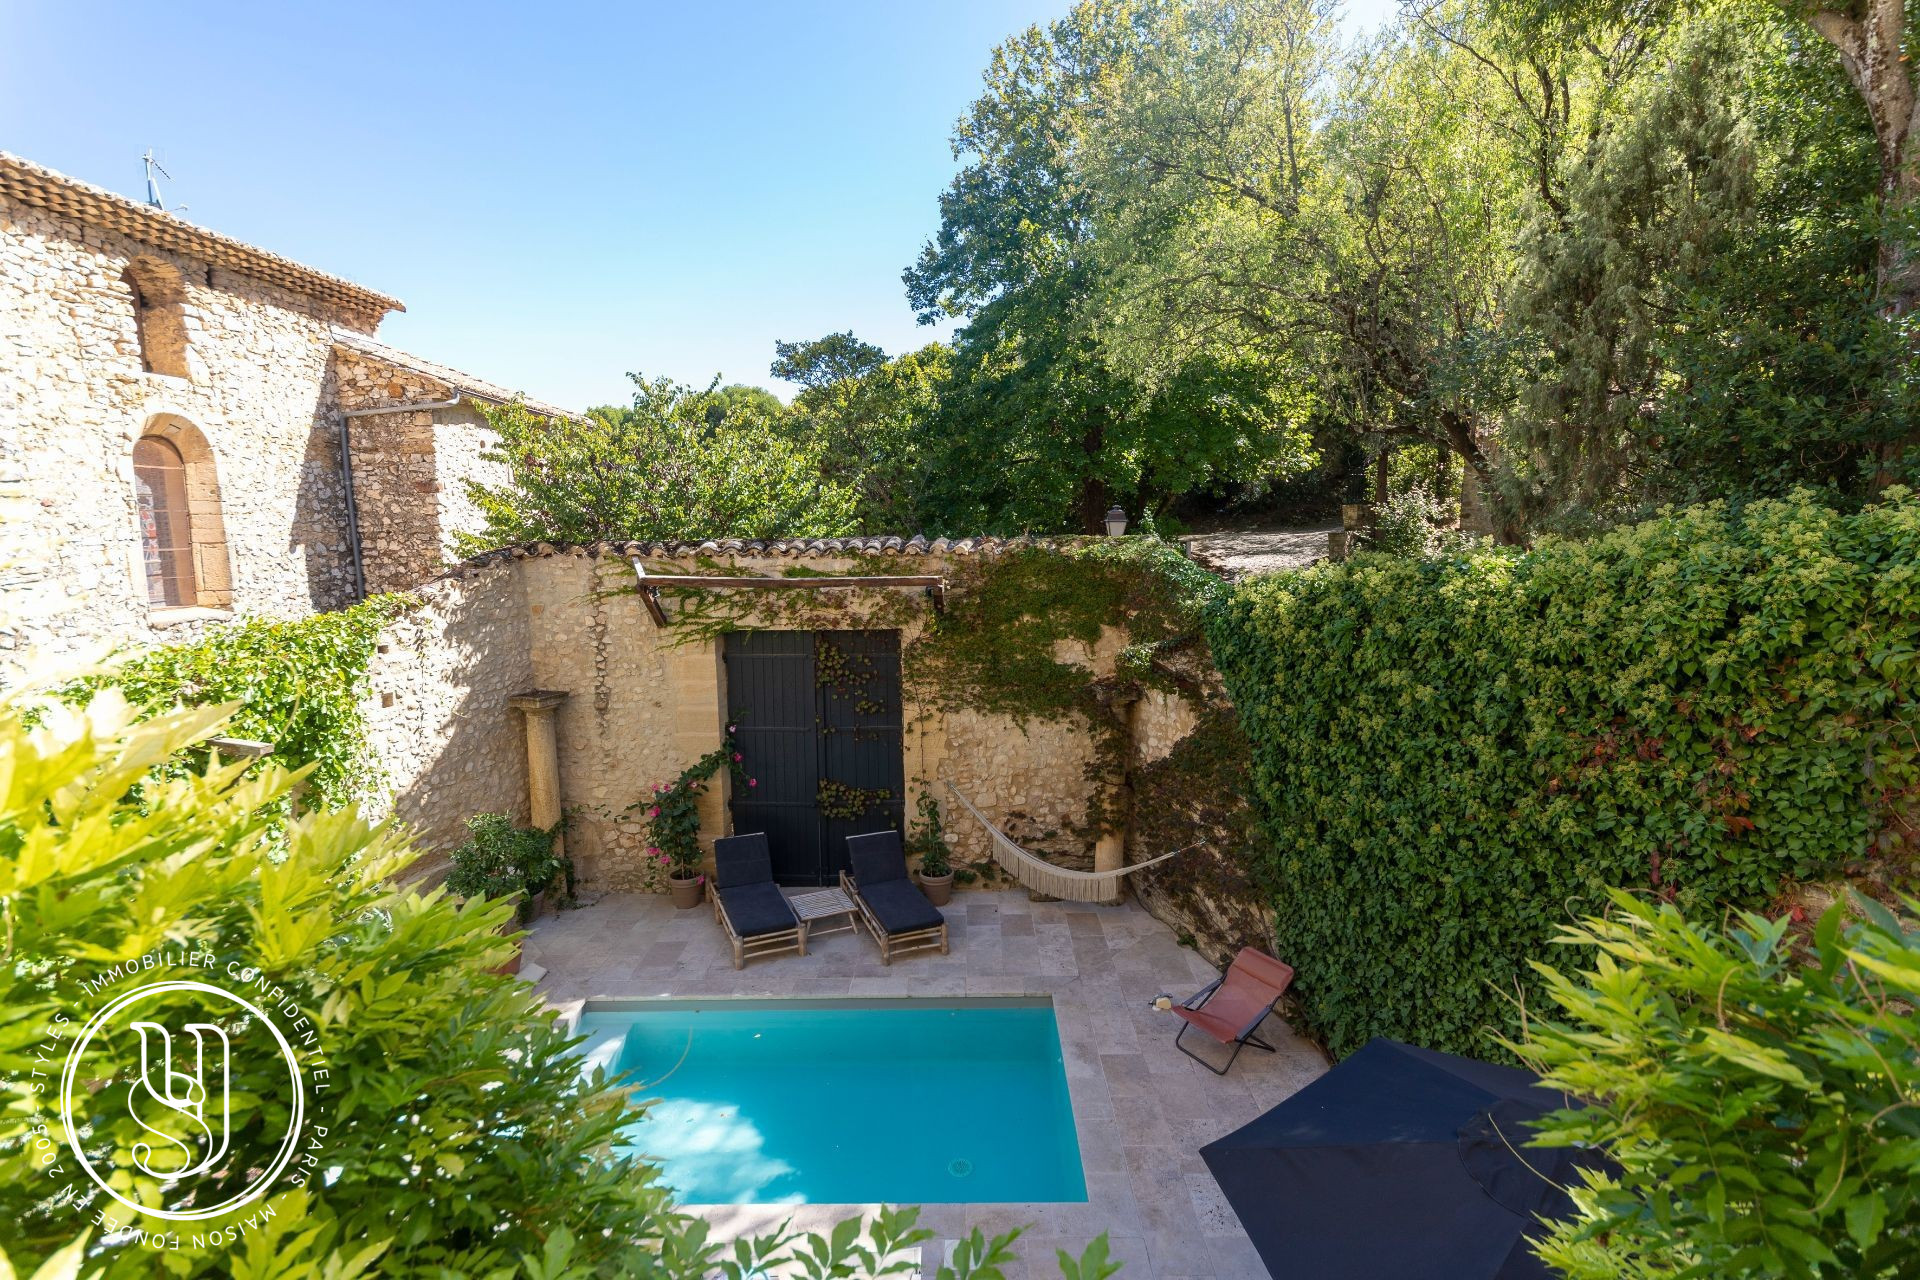 Uzes - surroundings, sold by S T Y LE S, a beautiful, refined and ele - image 9